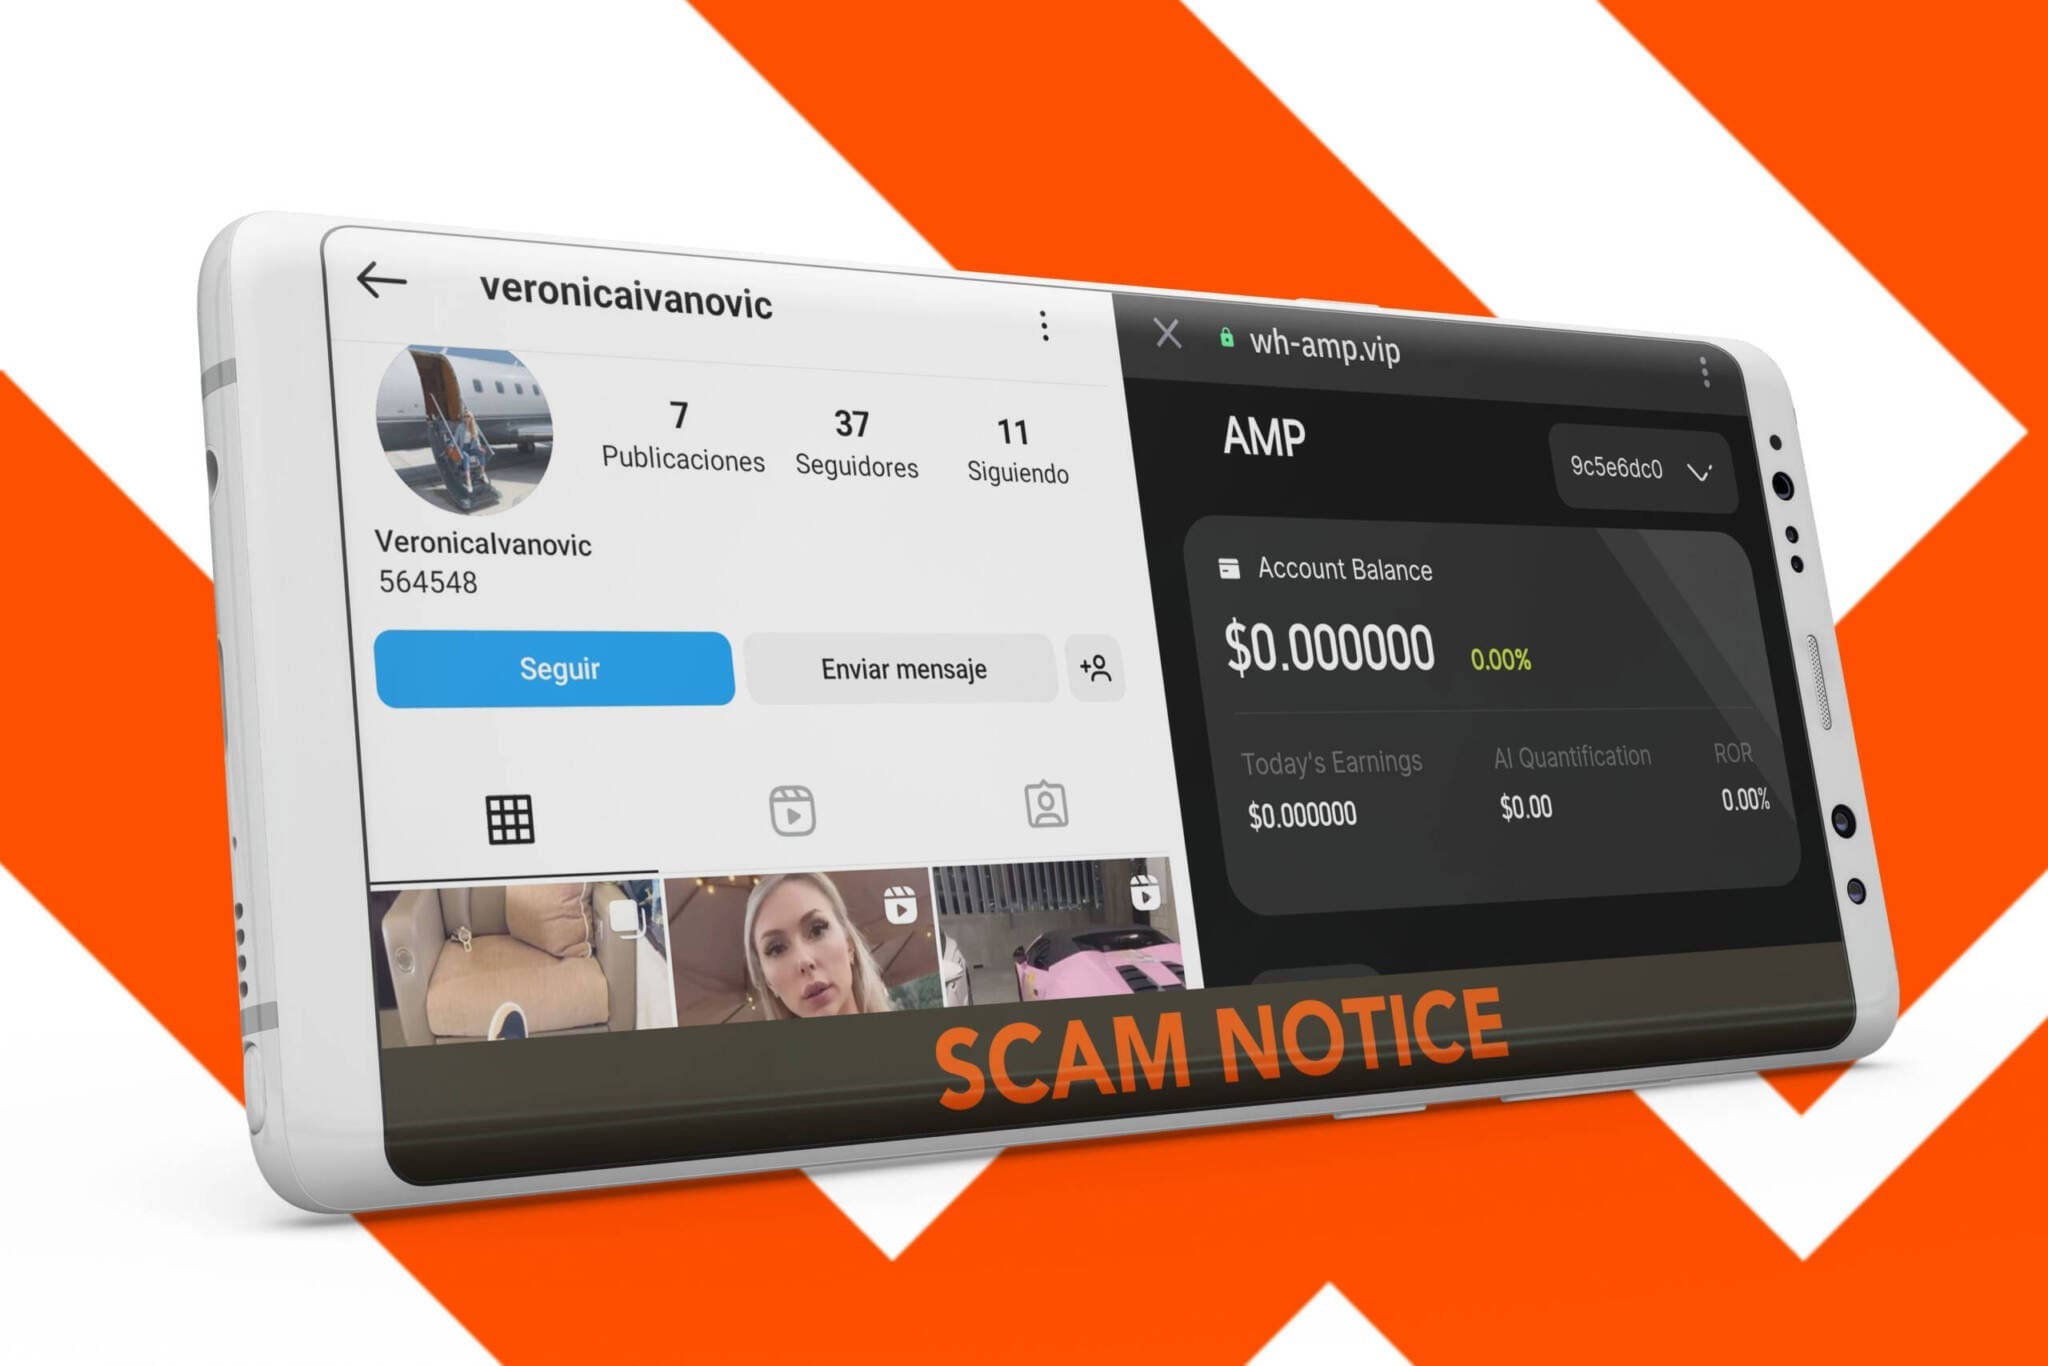 Cryptocurrency scam. Cryptocurrency fraud. wh-amp.vip app scam. Online scam. Online fraud. Scam with cryptocurrency application. Cryptocurrency scam. Cryptocurrency investment operations scam